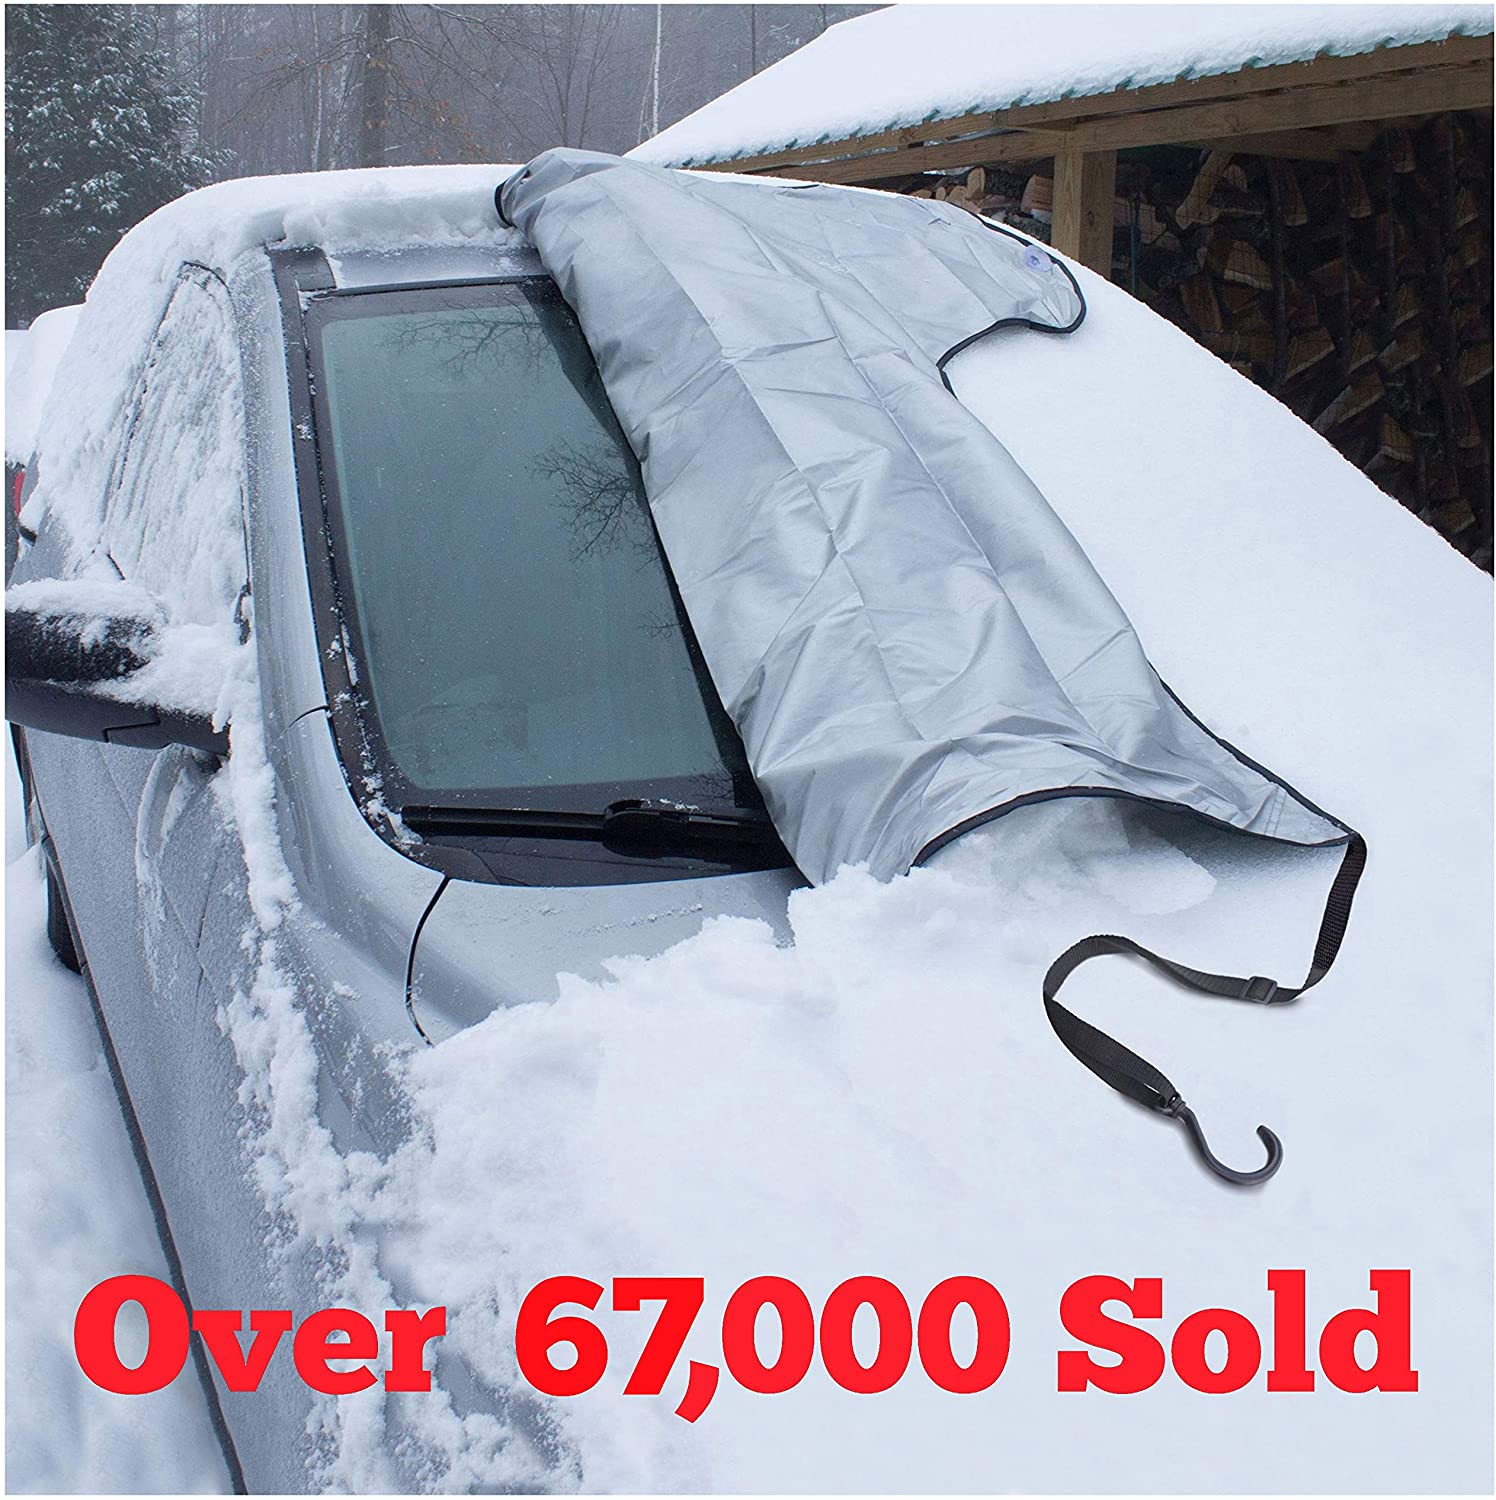 Windshield Snow Frost Ice Cover Sunshade Snow Covers Fits Most Car Van or Automobile Wakauto Windshield Snow Cover Truck 189x98cm SUV 